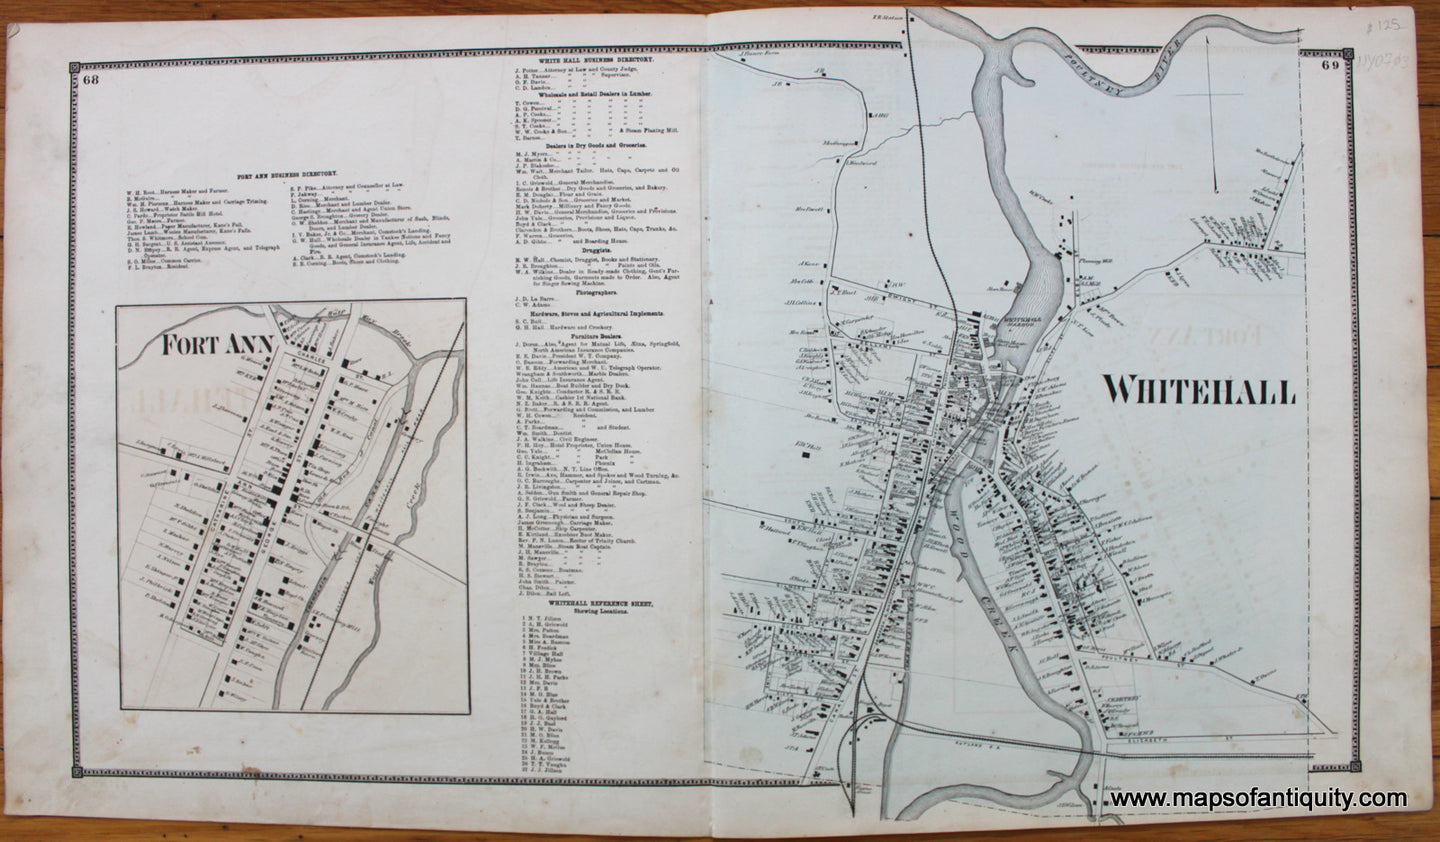 Antique-Map-Town-Towns-Whitehall-Fort-Ann-New-Topographical-Atlas-of-Washington-County-New-York-by-Stone-and-Stewart-1866-1860s-1800s-Mid-Late-19th-Century-Maps-of-Antiquity-